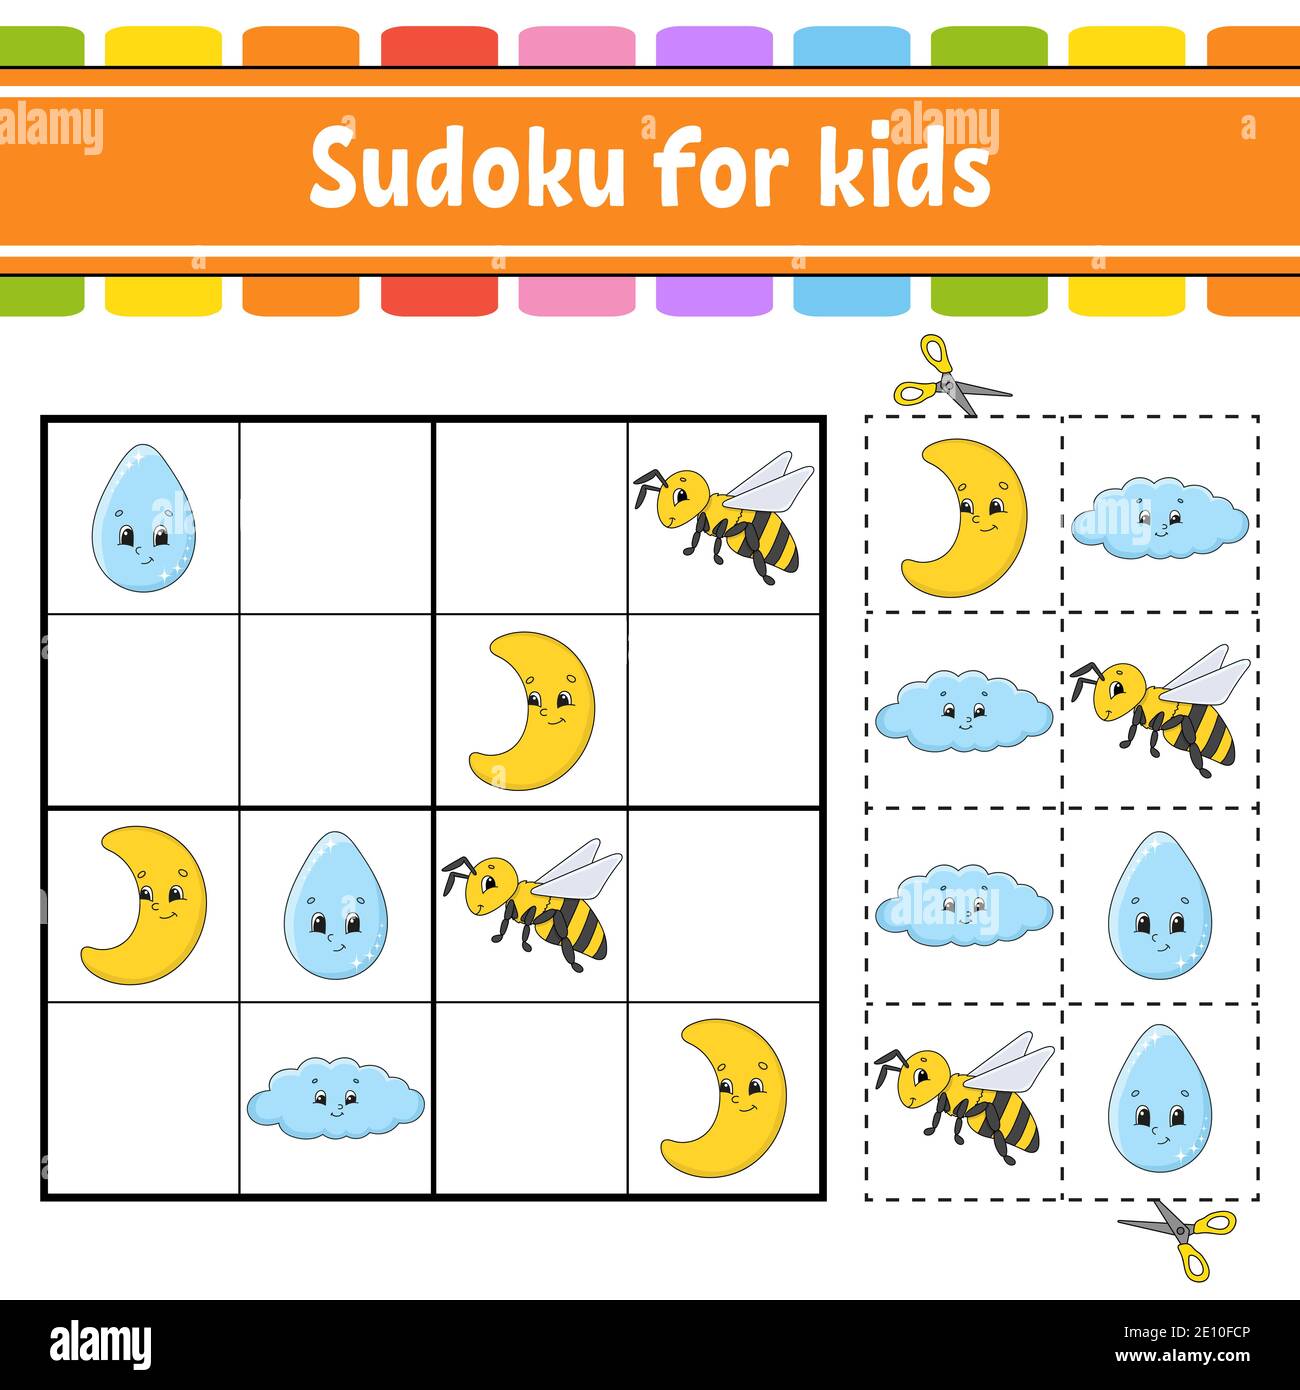 Sudoku for kids. Education developing worksheet. Activity page with pictures. Puzzle game for children. Logical thinking training. Isolated vector ill Stock Vector